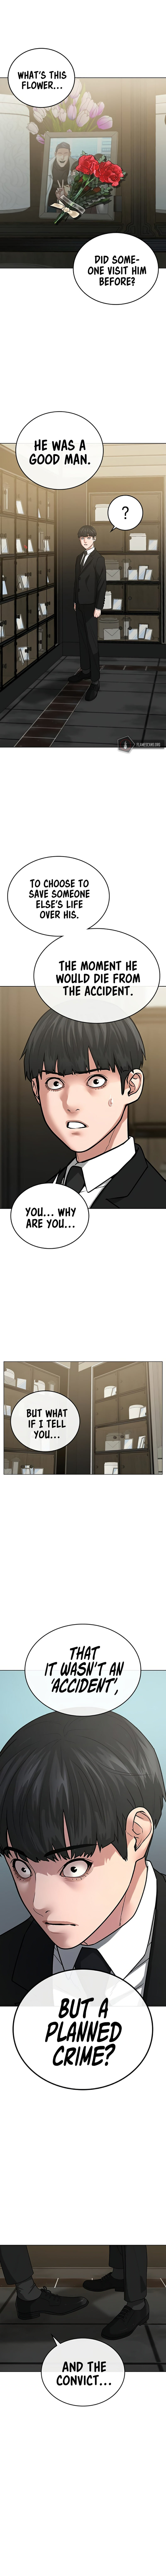 reality-quest-chap-24-17